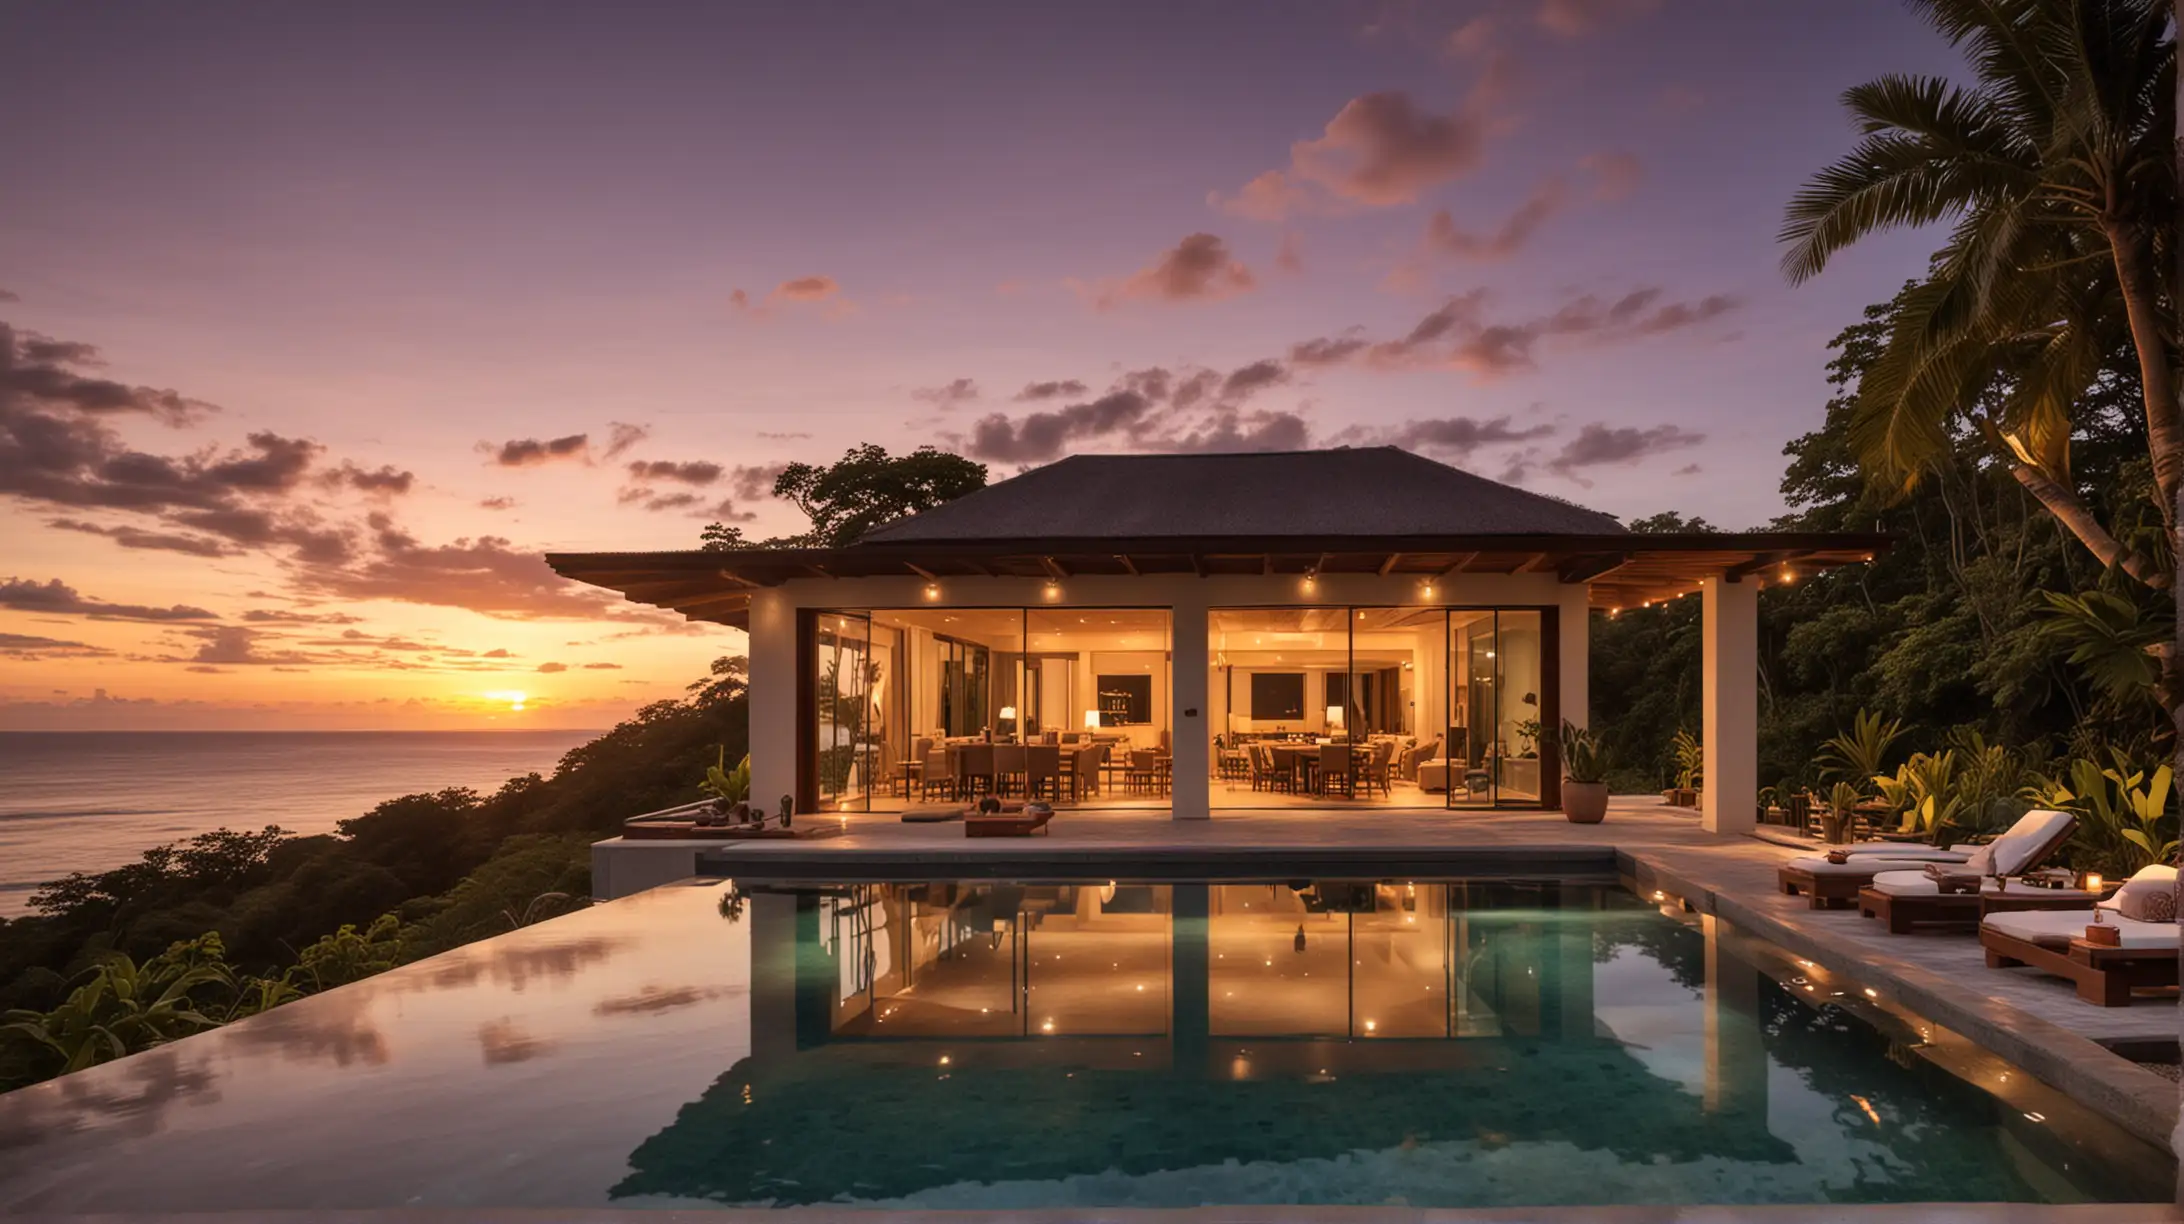 create an image of an oceanfront vacation home in Costa Rica with an infinity pool and outdoor living spaces with warm lighting at sunset